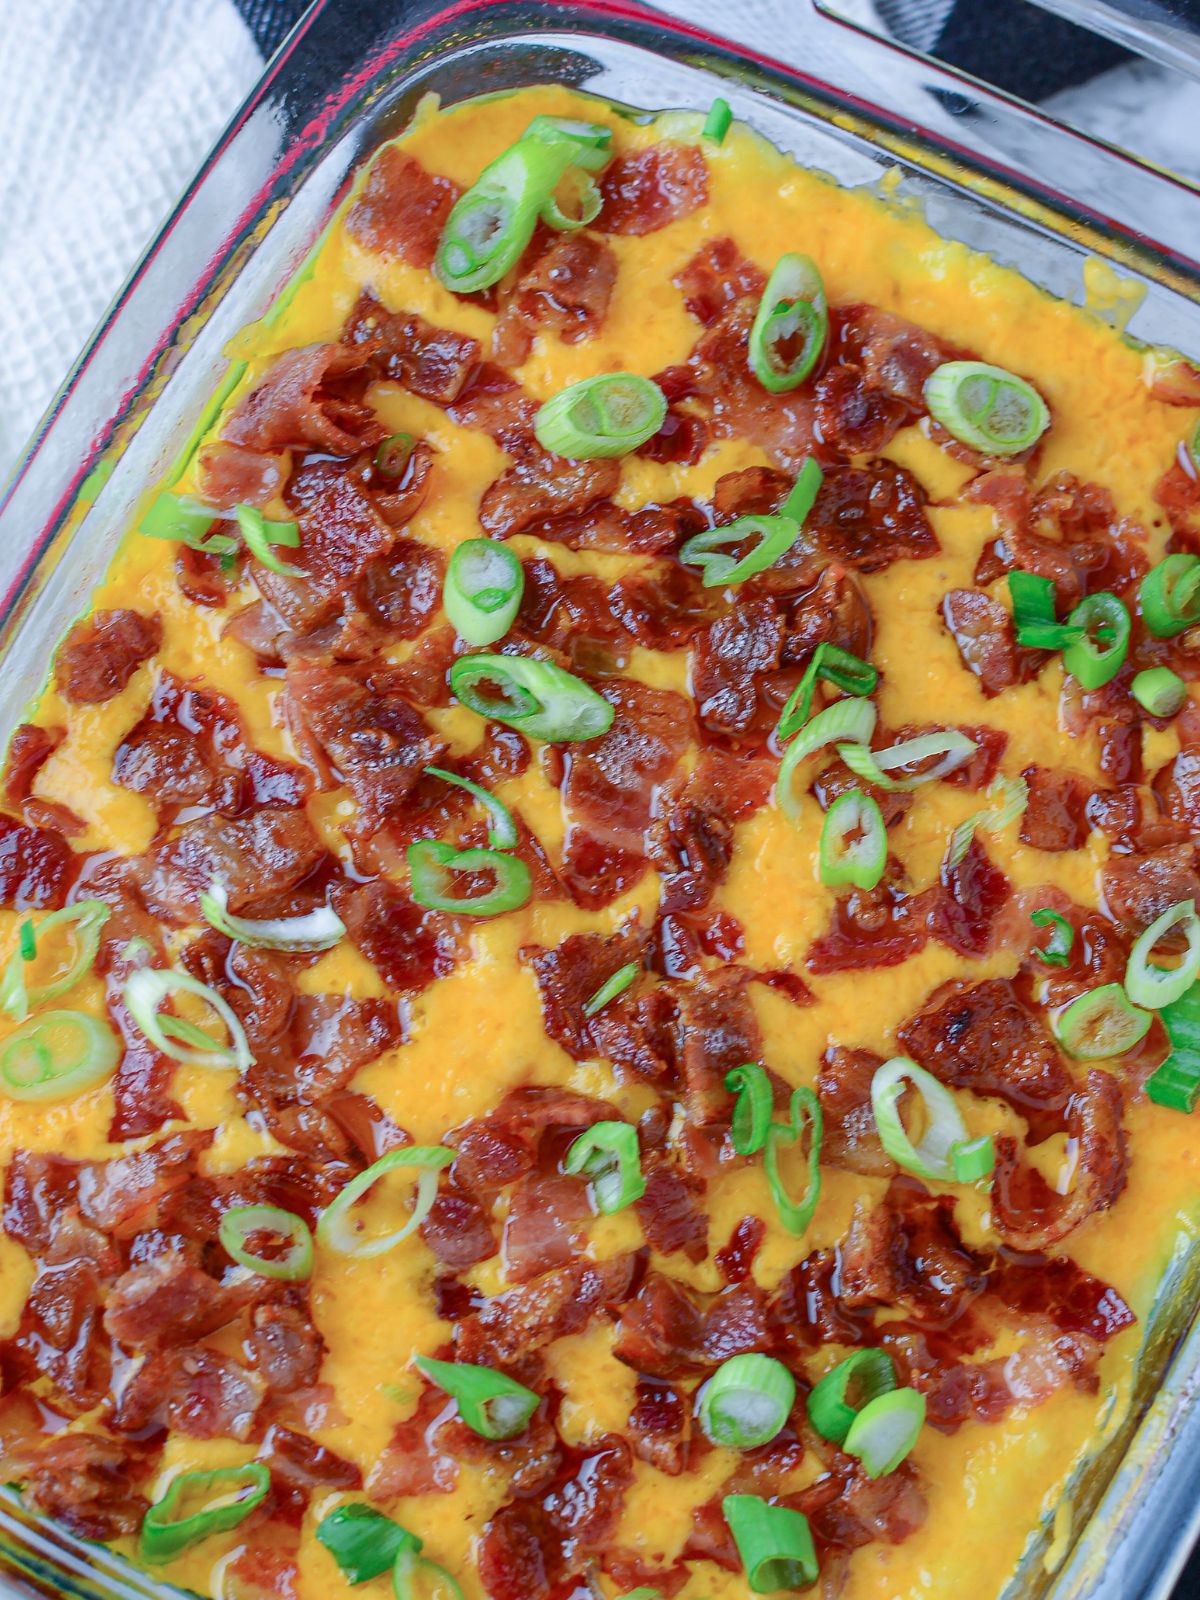 Baked mashed potato casserole with cheese, bacon and green onions on top.